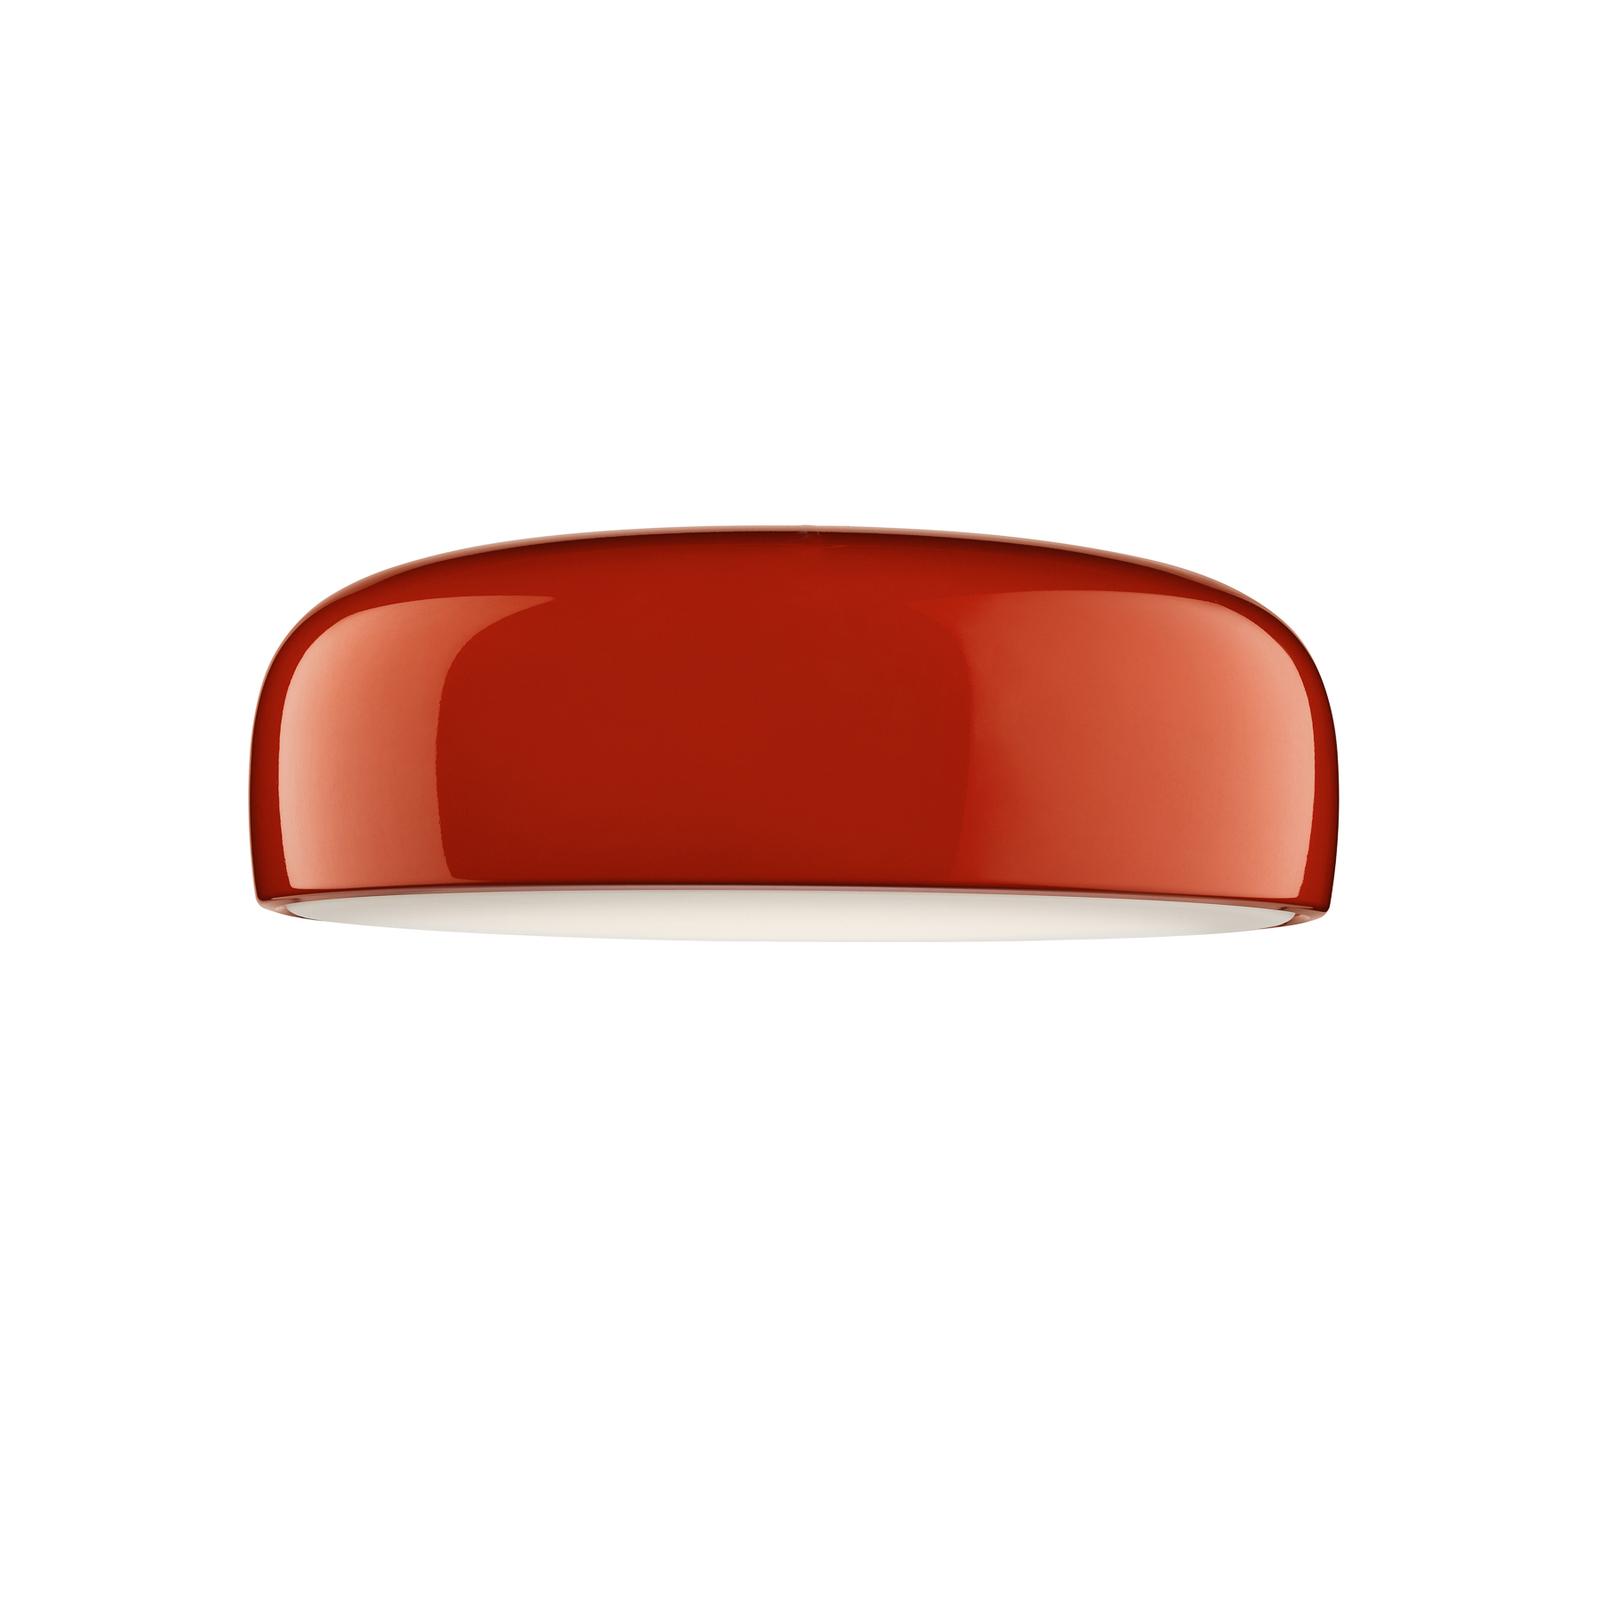 FLOS Smithfield C LED ceiling light in red